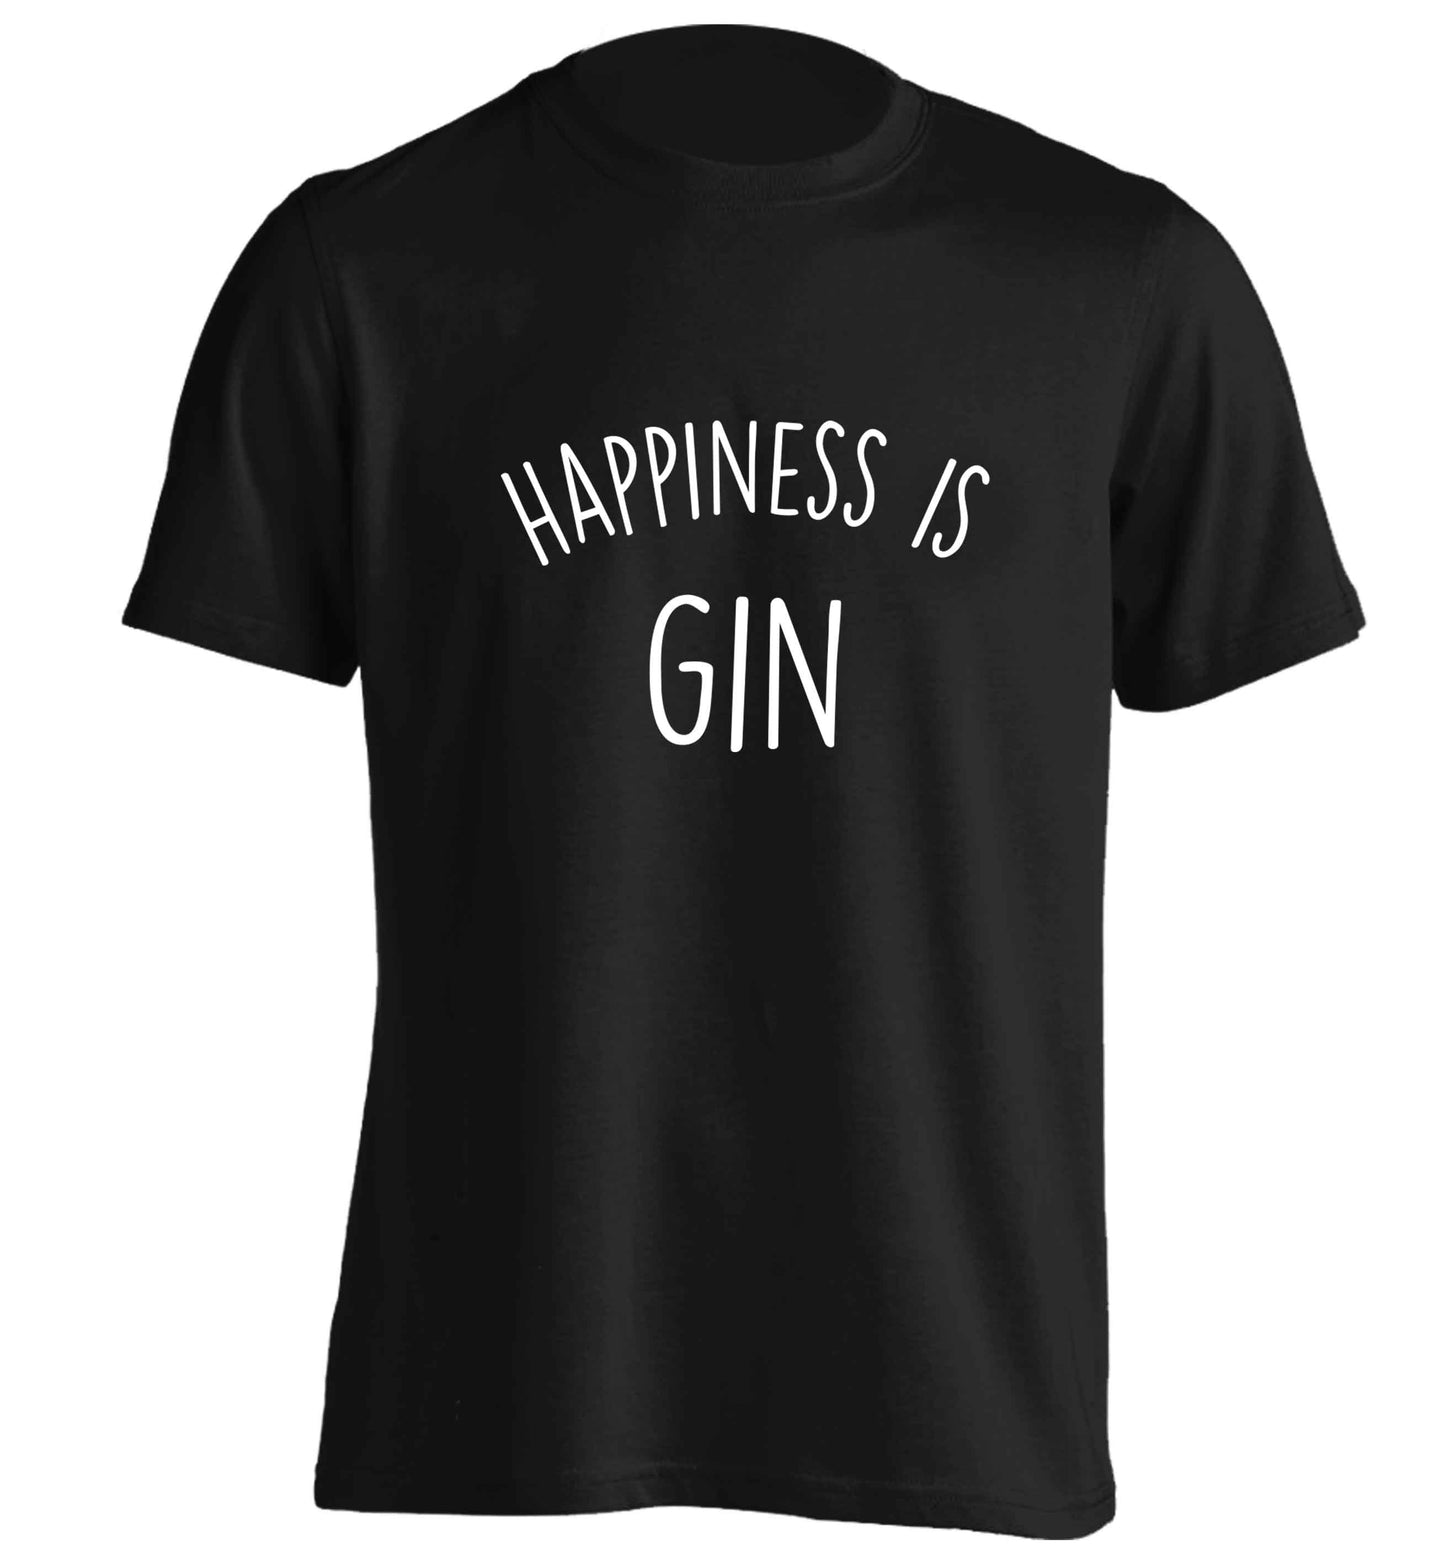 Happiness is gin adults unisex black Tshirt 2XL